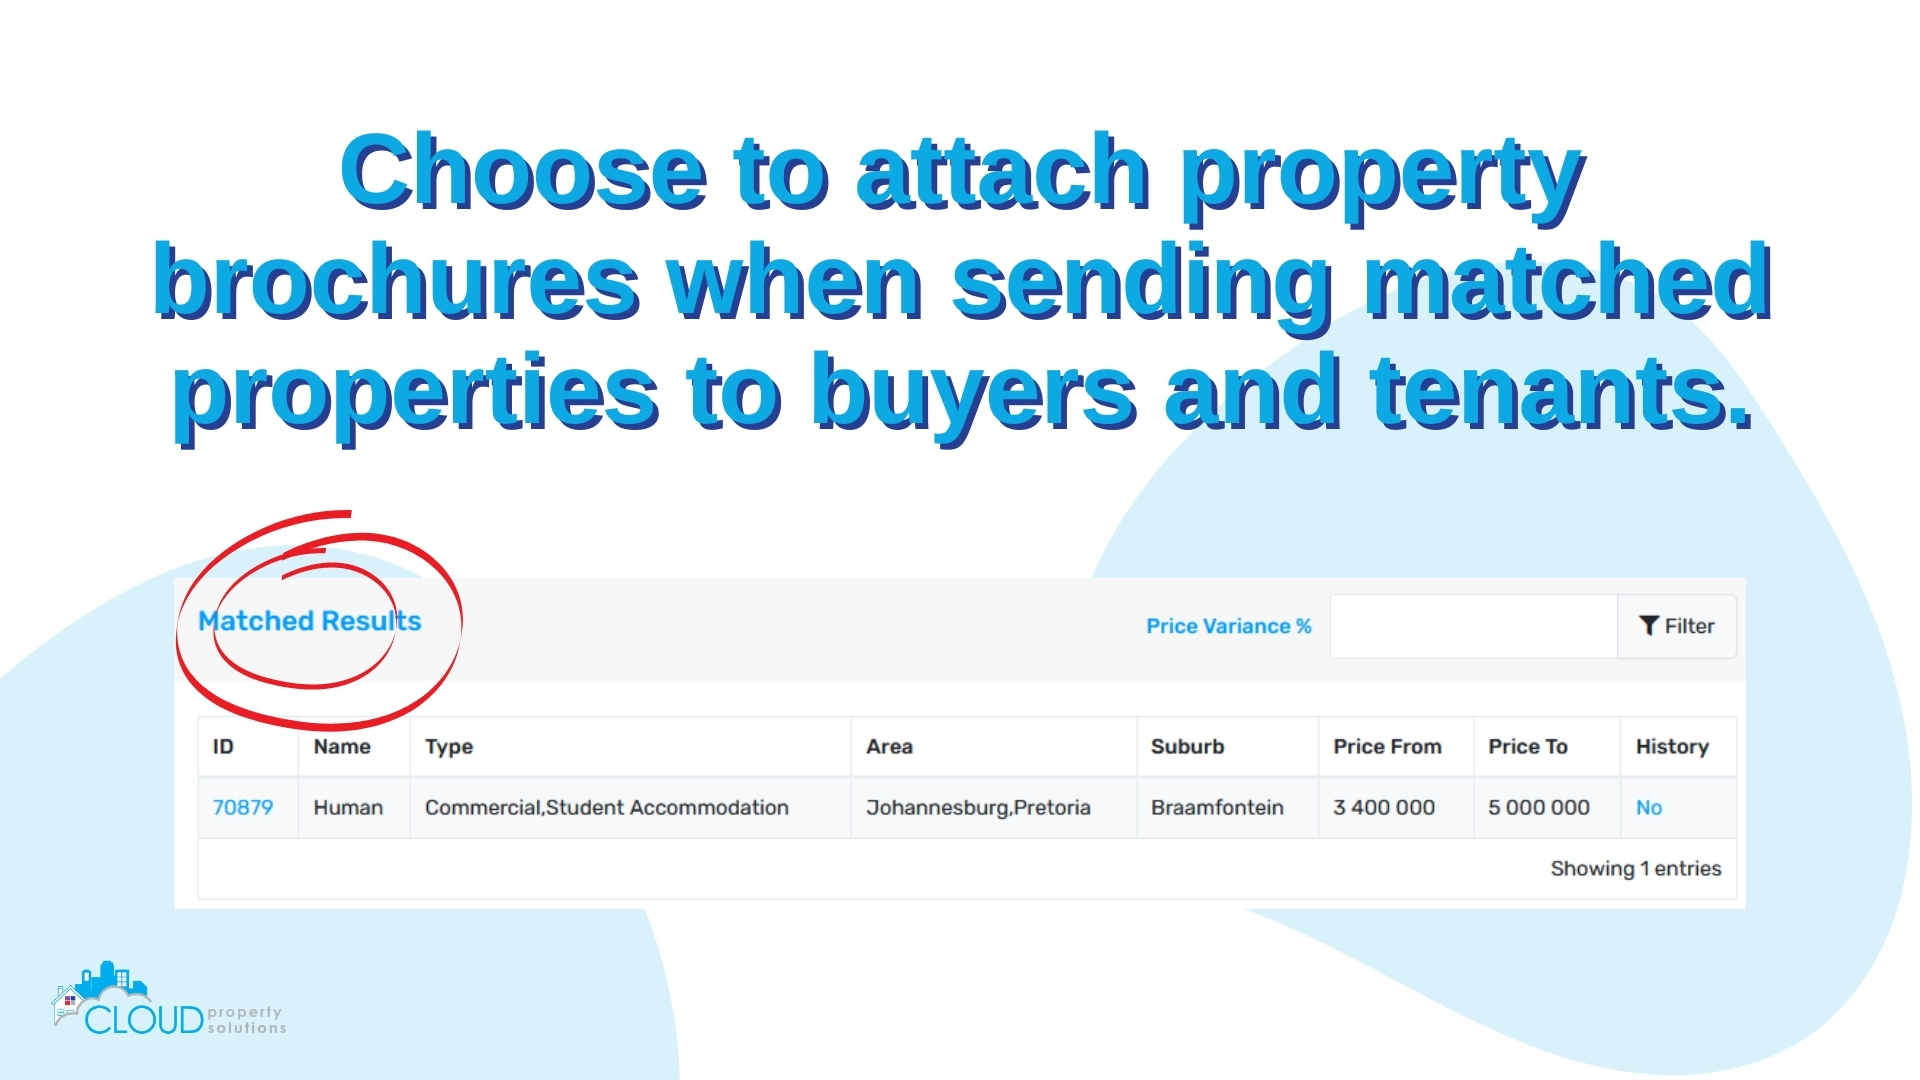 Email property brochures to matched buyers or tenants.